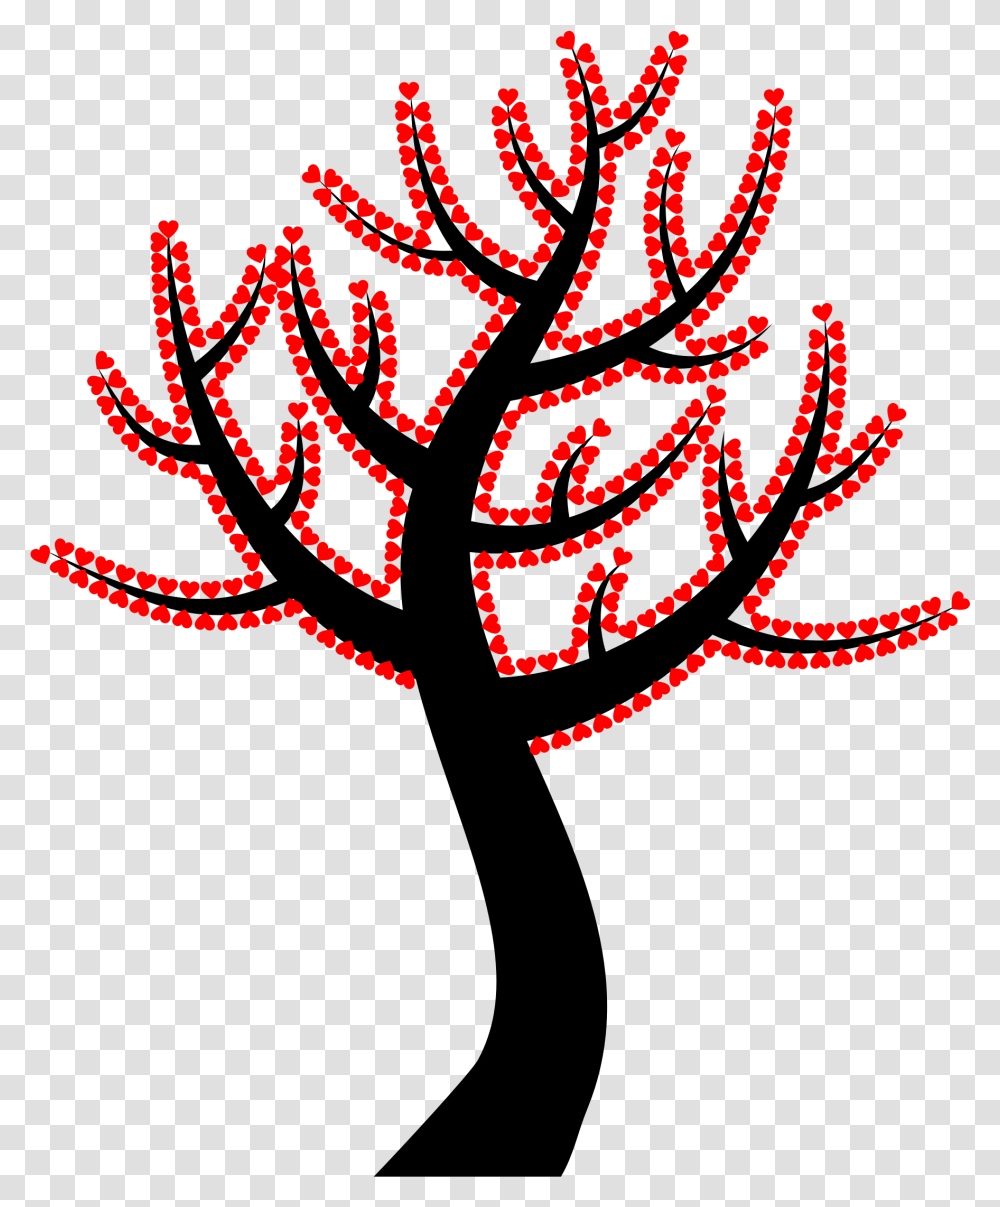 This Free Icons Design Of Valentine Hearts Tree Colorful Tree With Branches With Background, Poster, Advertisement, Pac Man Transparent Png